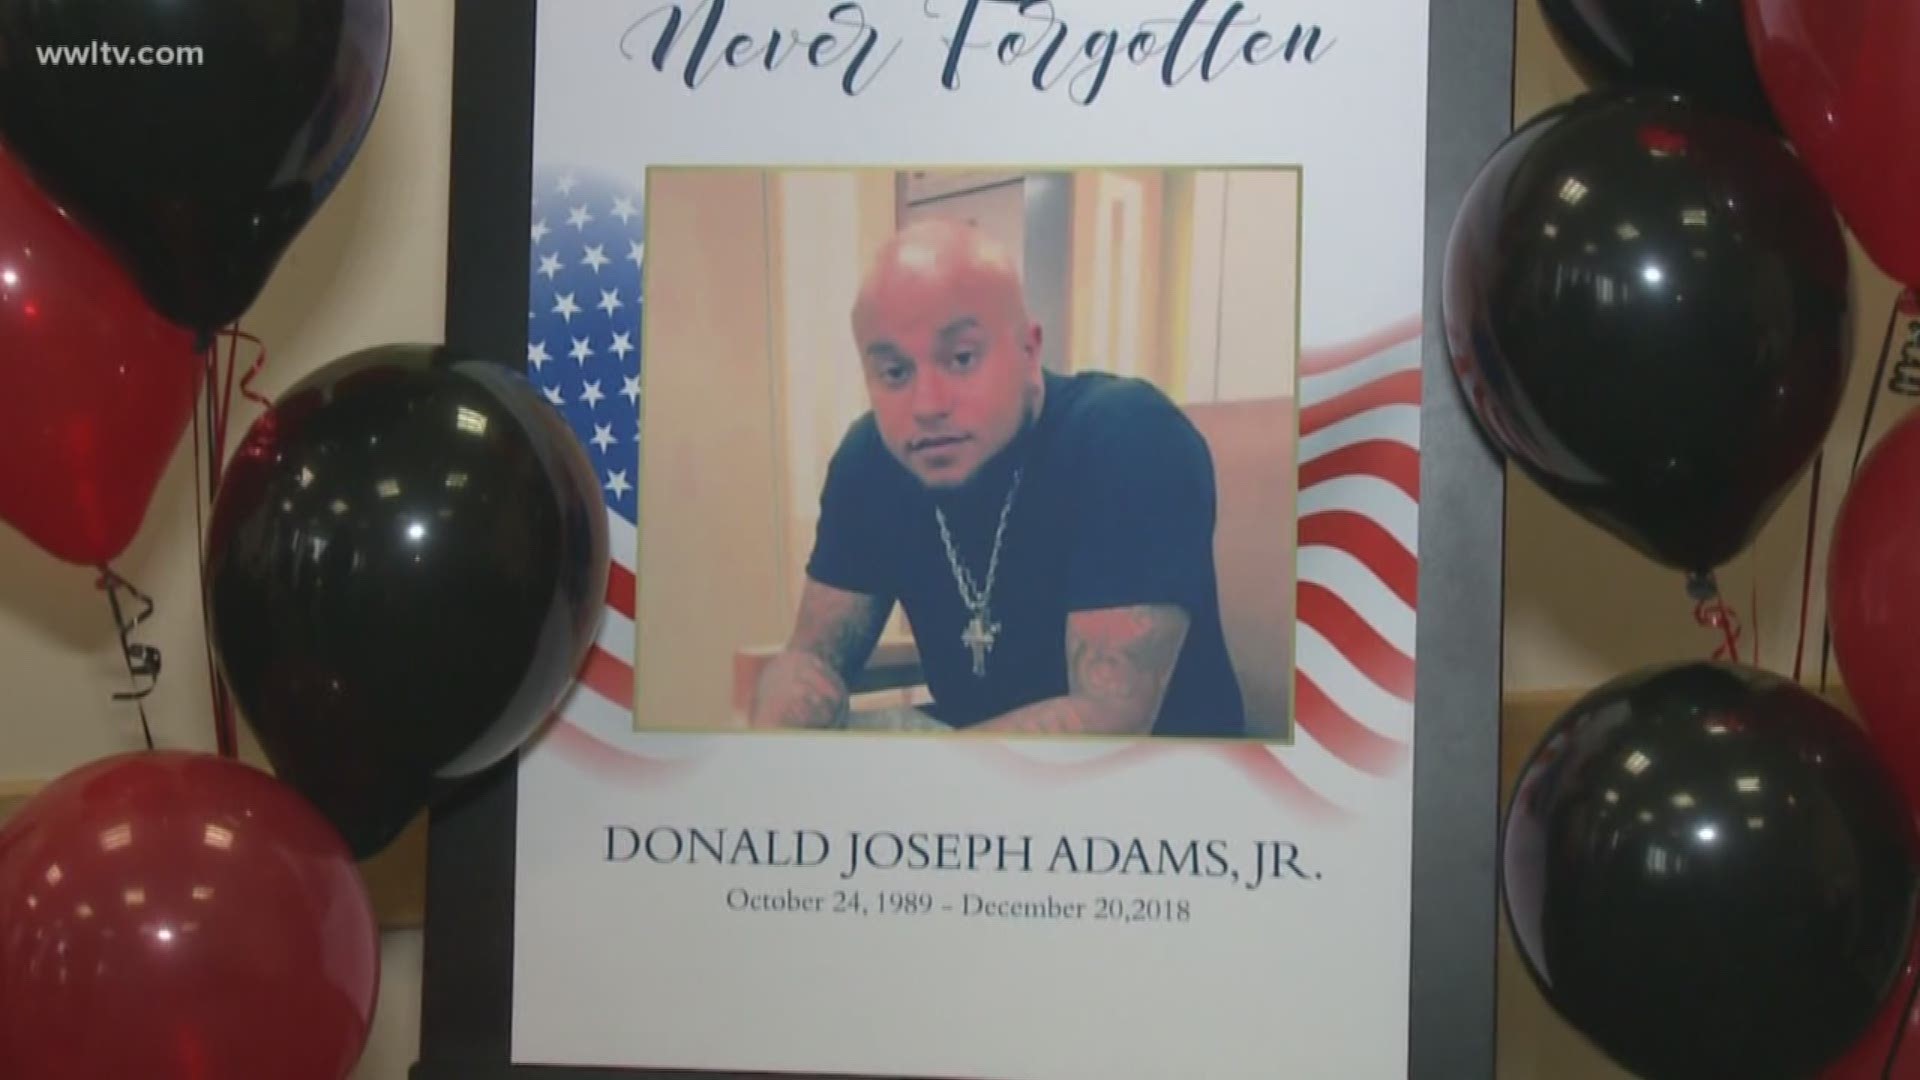 29-year-old Donald Adams Jr. was murdered in his New Orleans East home days before Christmas. His coworkers honored his memory with a special ceremony Monday.